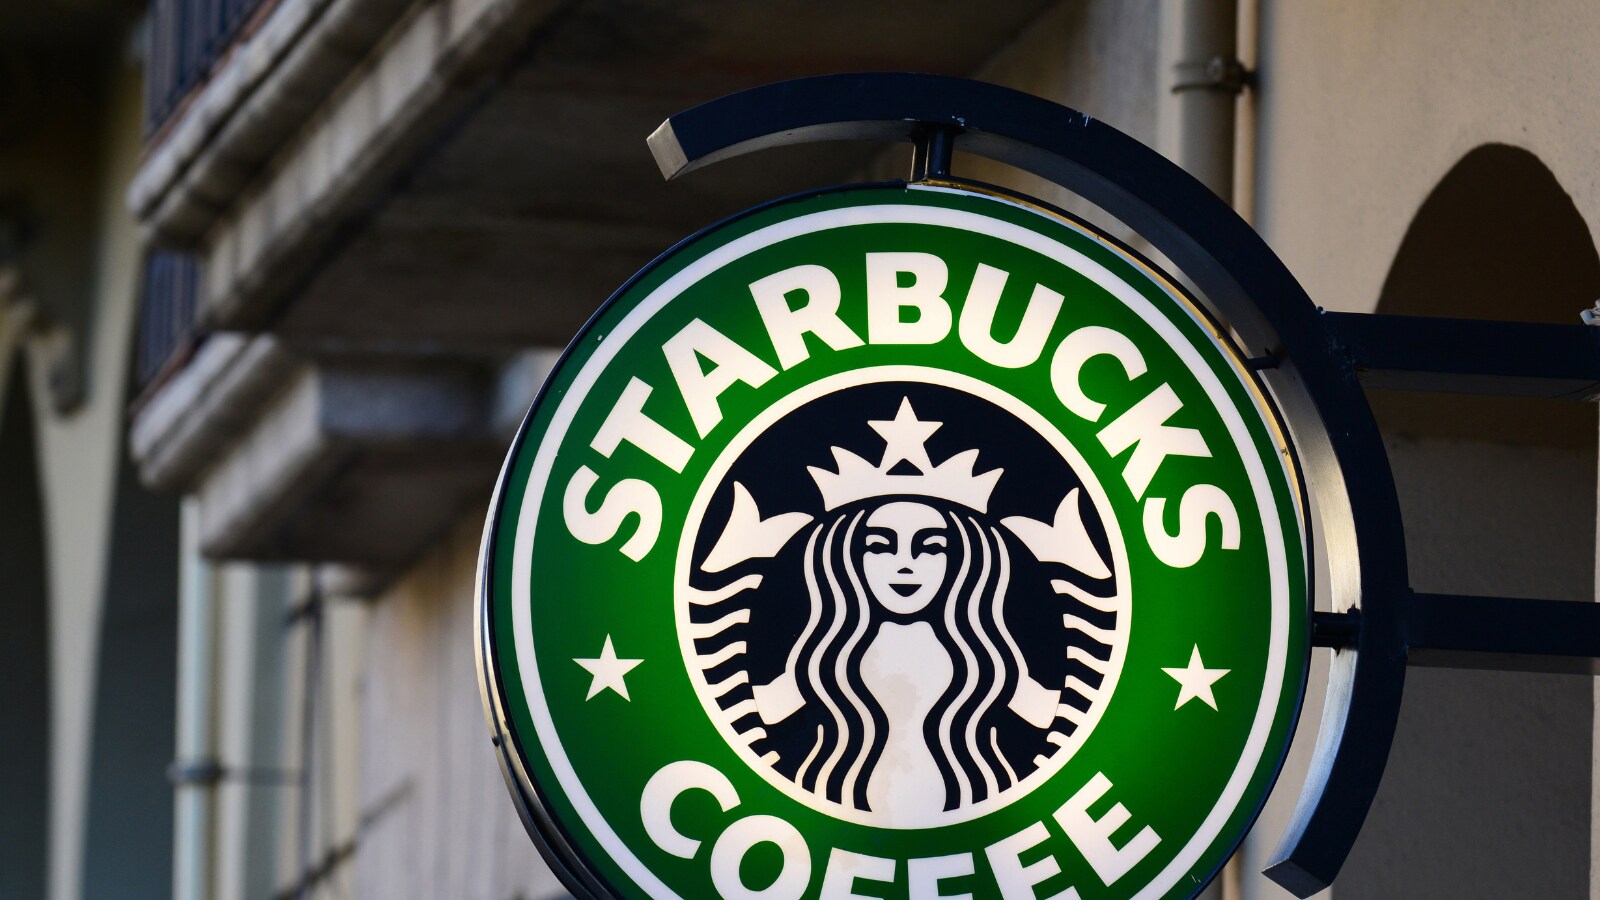 Couple charged Rs 3.6 lakh for two cups of coffee at Starbucks.